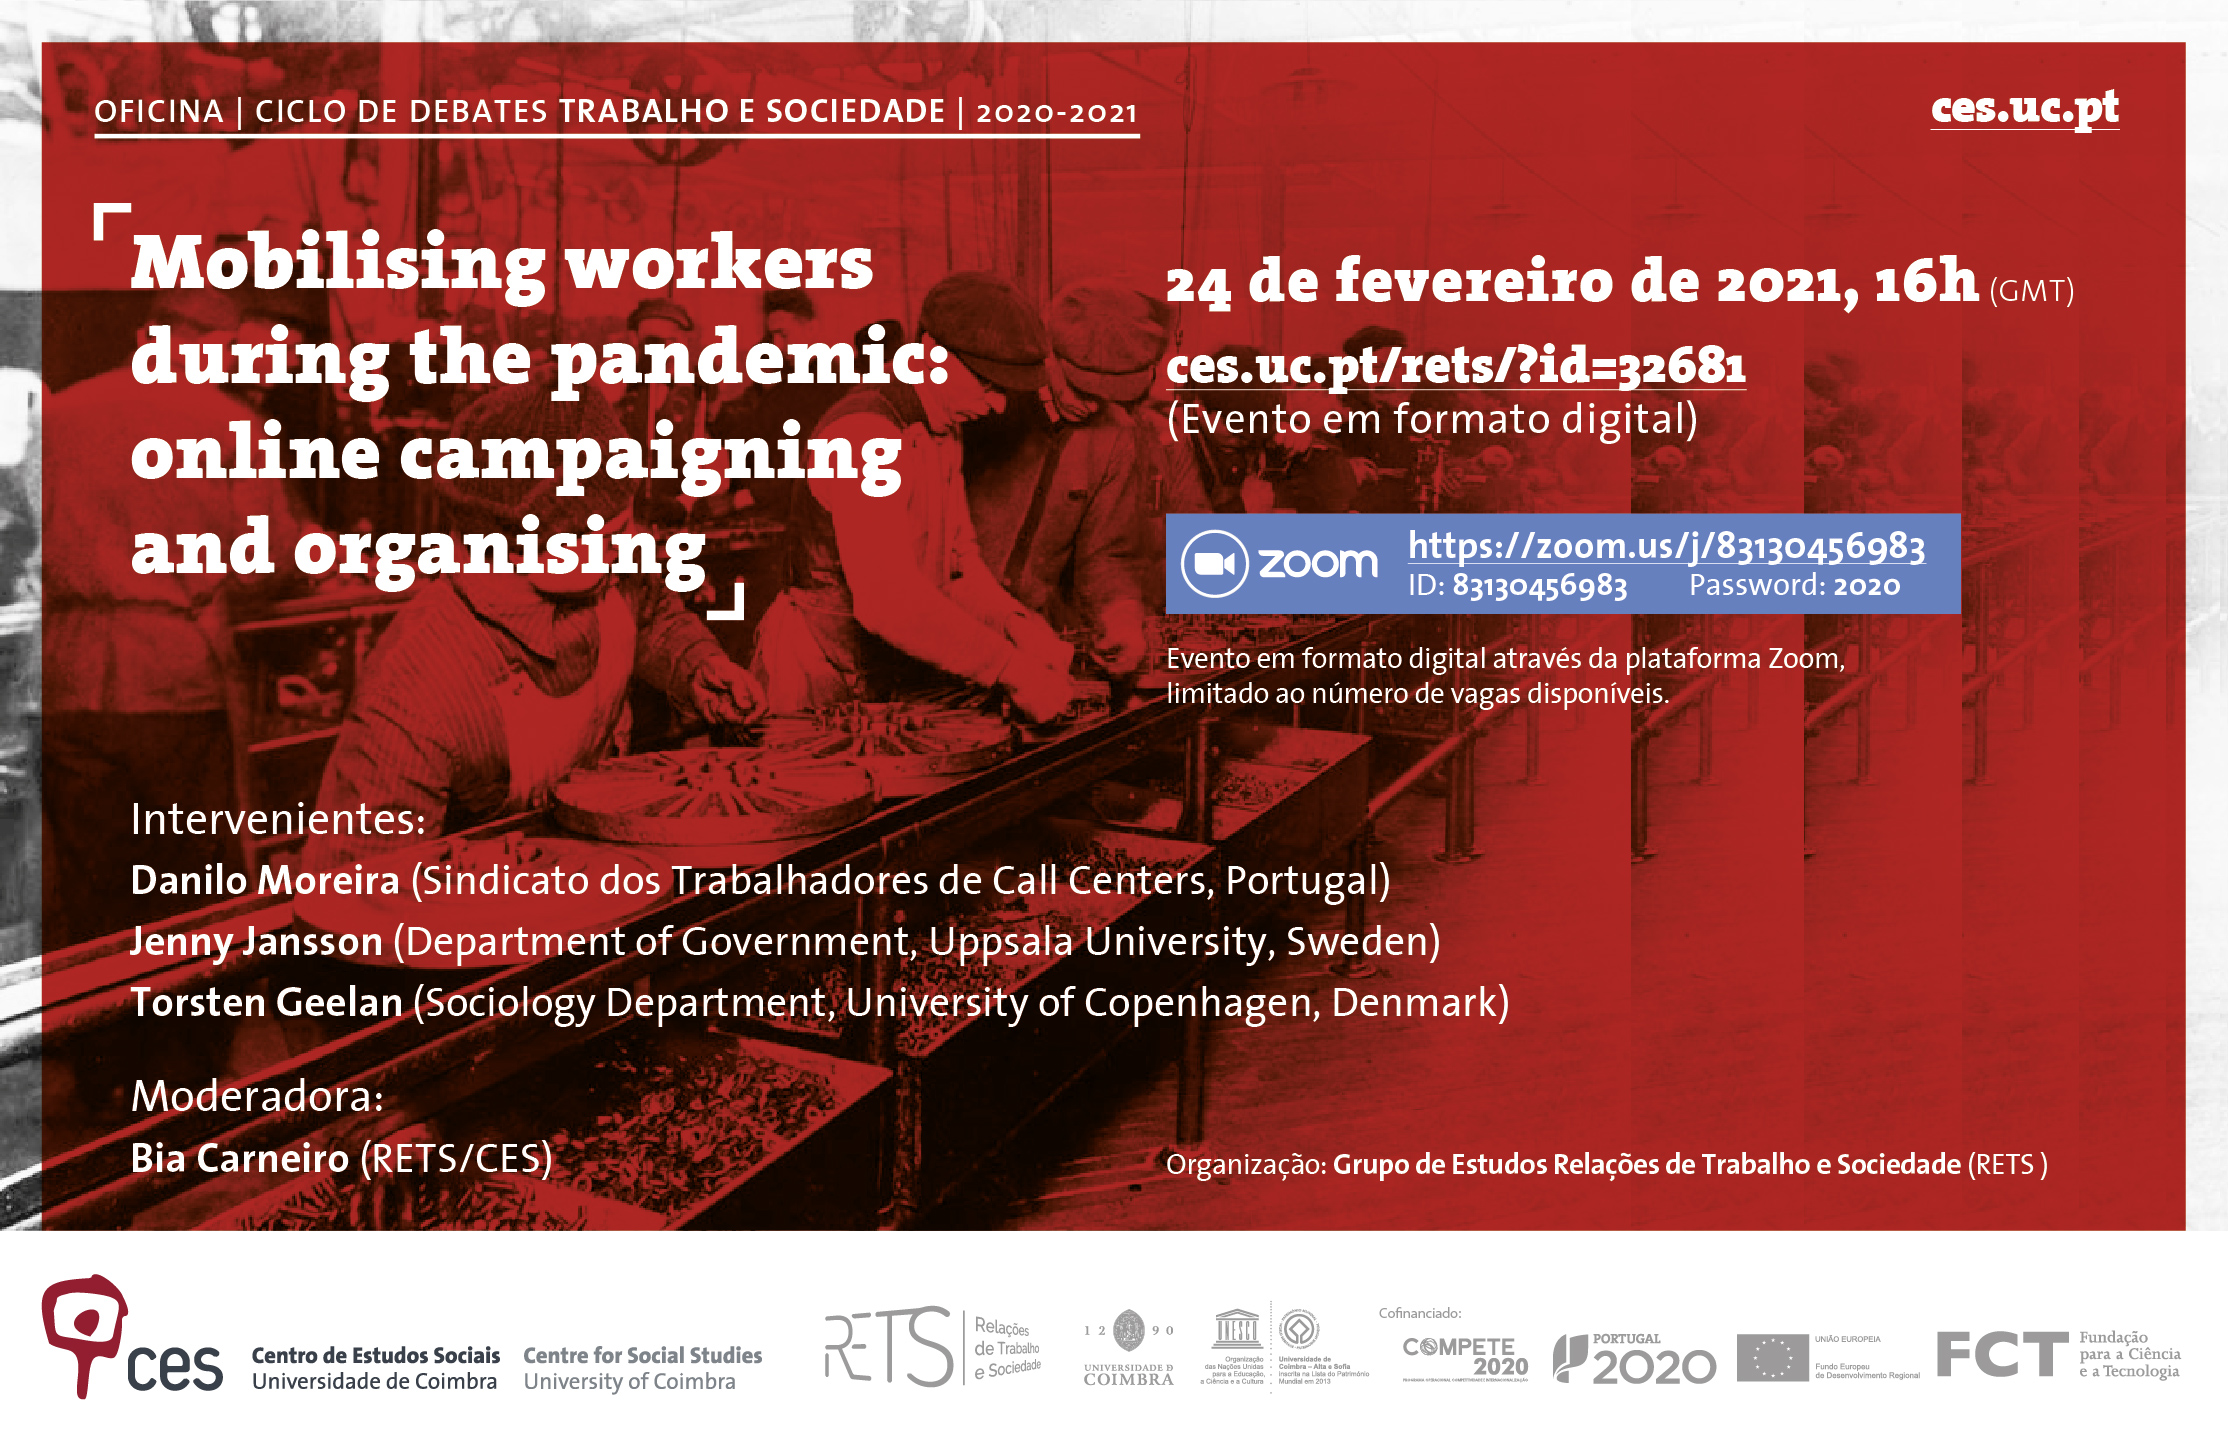 Mobilising workers during the pandemic: online campaigning and organising <span id="edit_32681"><script>$(function() { $('#edit_32681').load( "/myces/user/editobj.php?tipo=evento&id=32681" ); });</script></span>